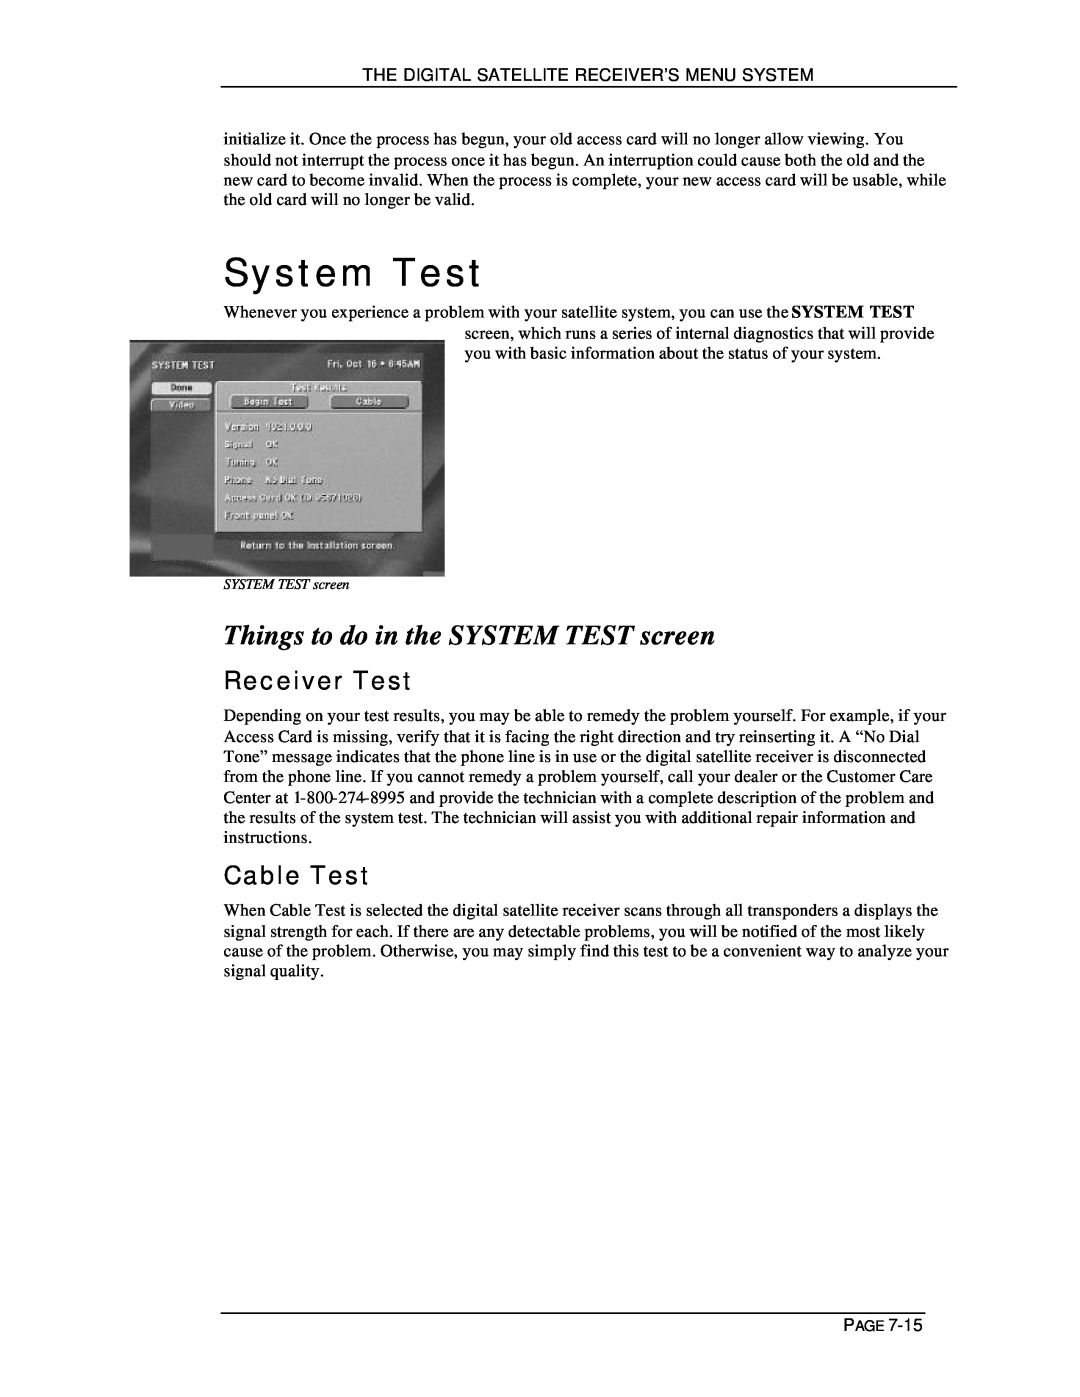 DirecTV HIRD-D11, HIRD-D01 owner manual System Test, Things to do in the SYSTEM TEST screen, Receiver Test, Cable Test 